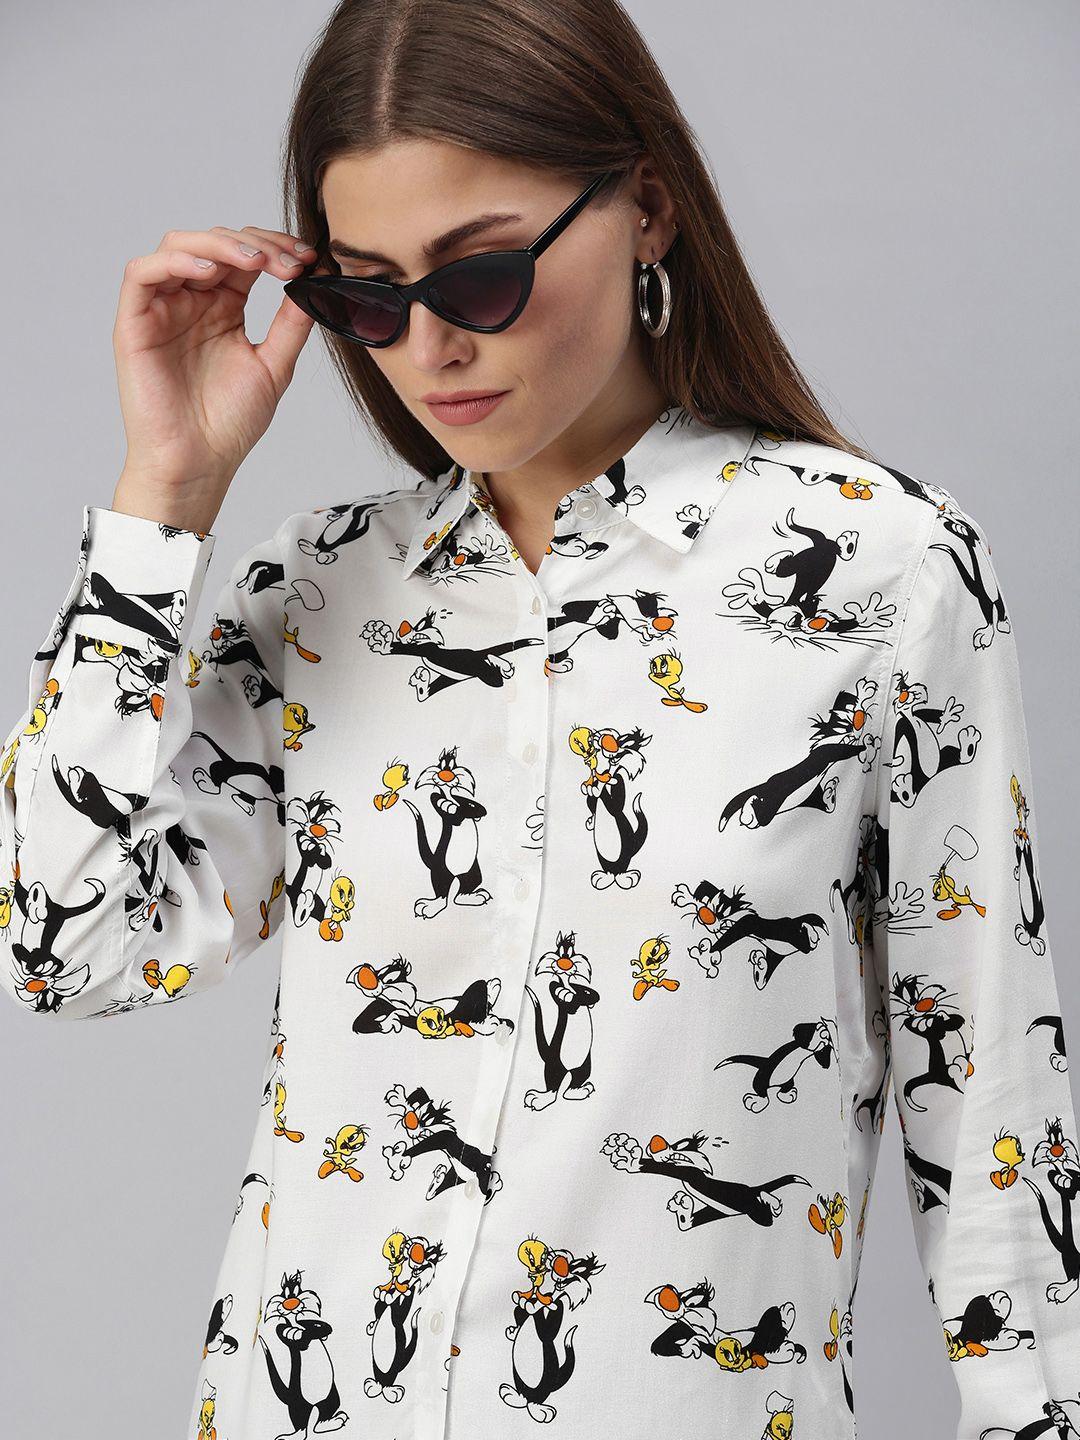 the souled store women white opaque sylvester & tweety printed casual shirt